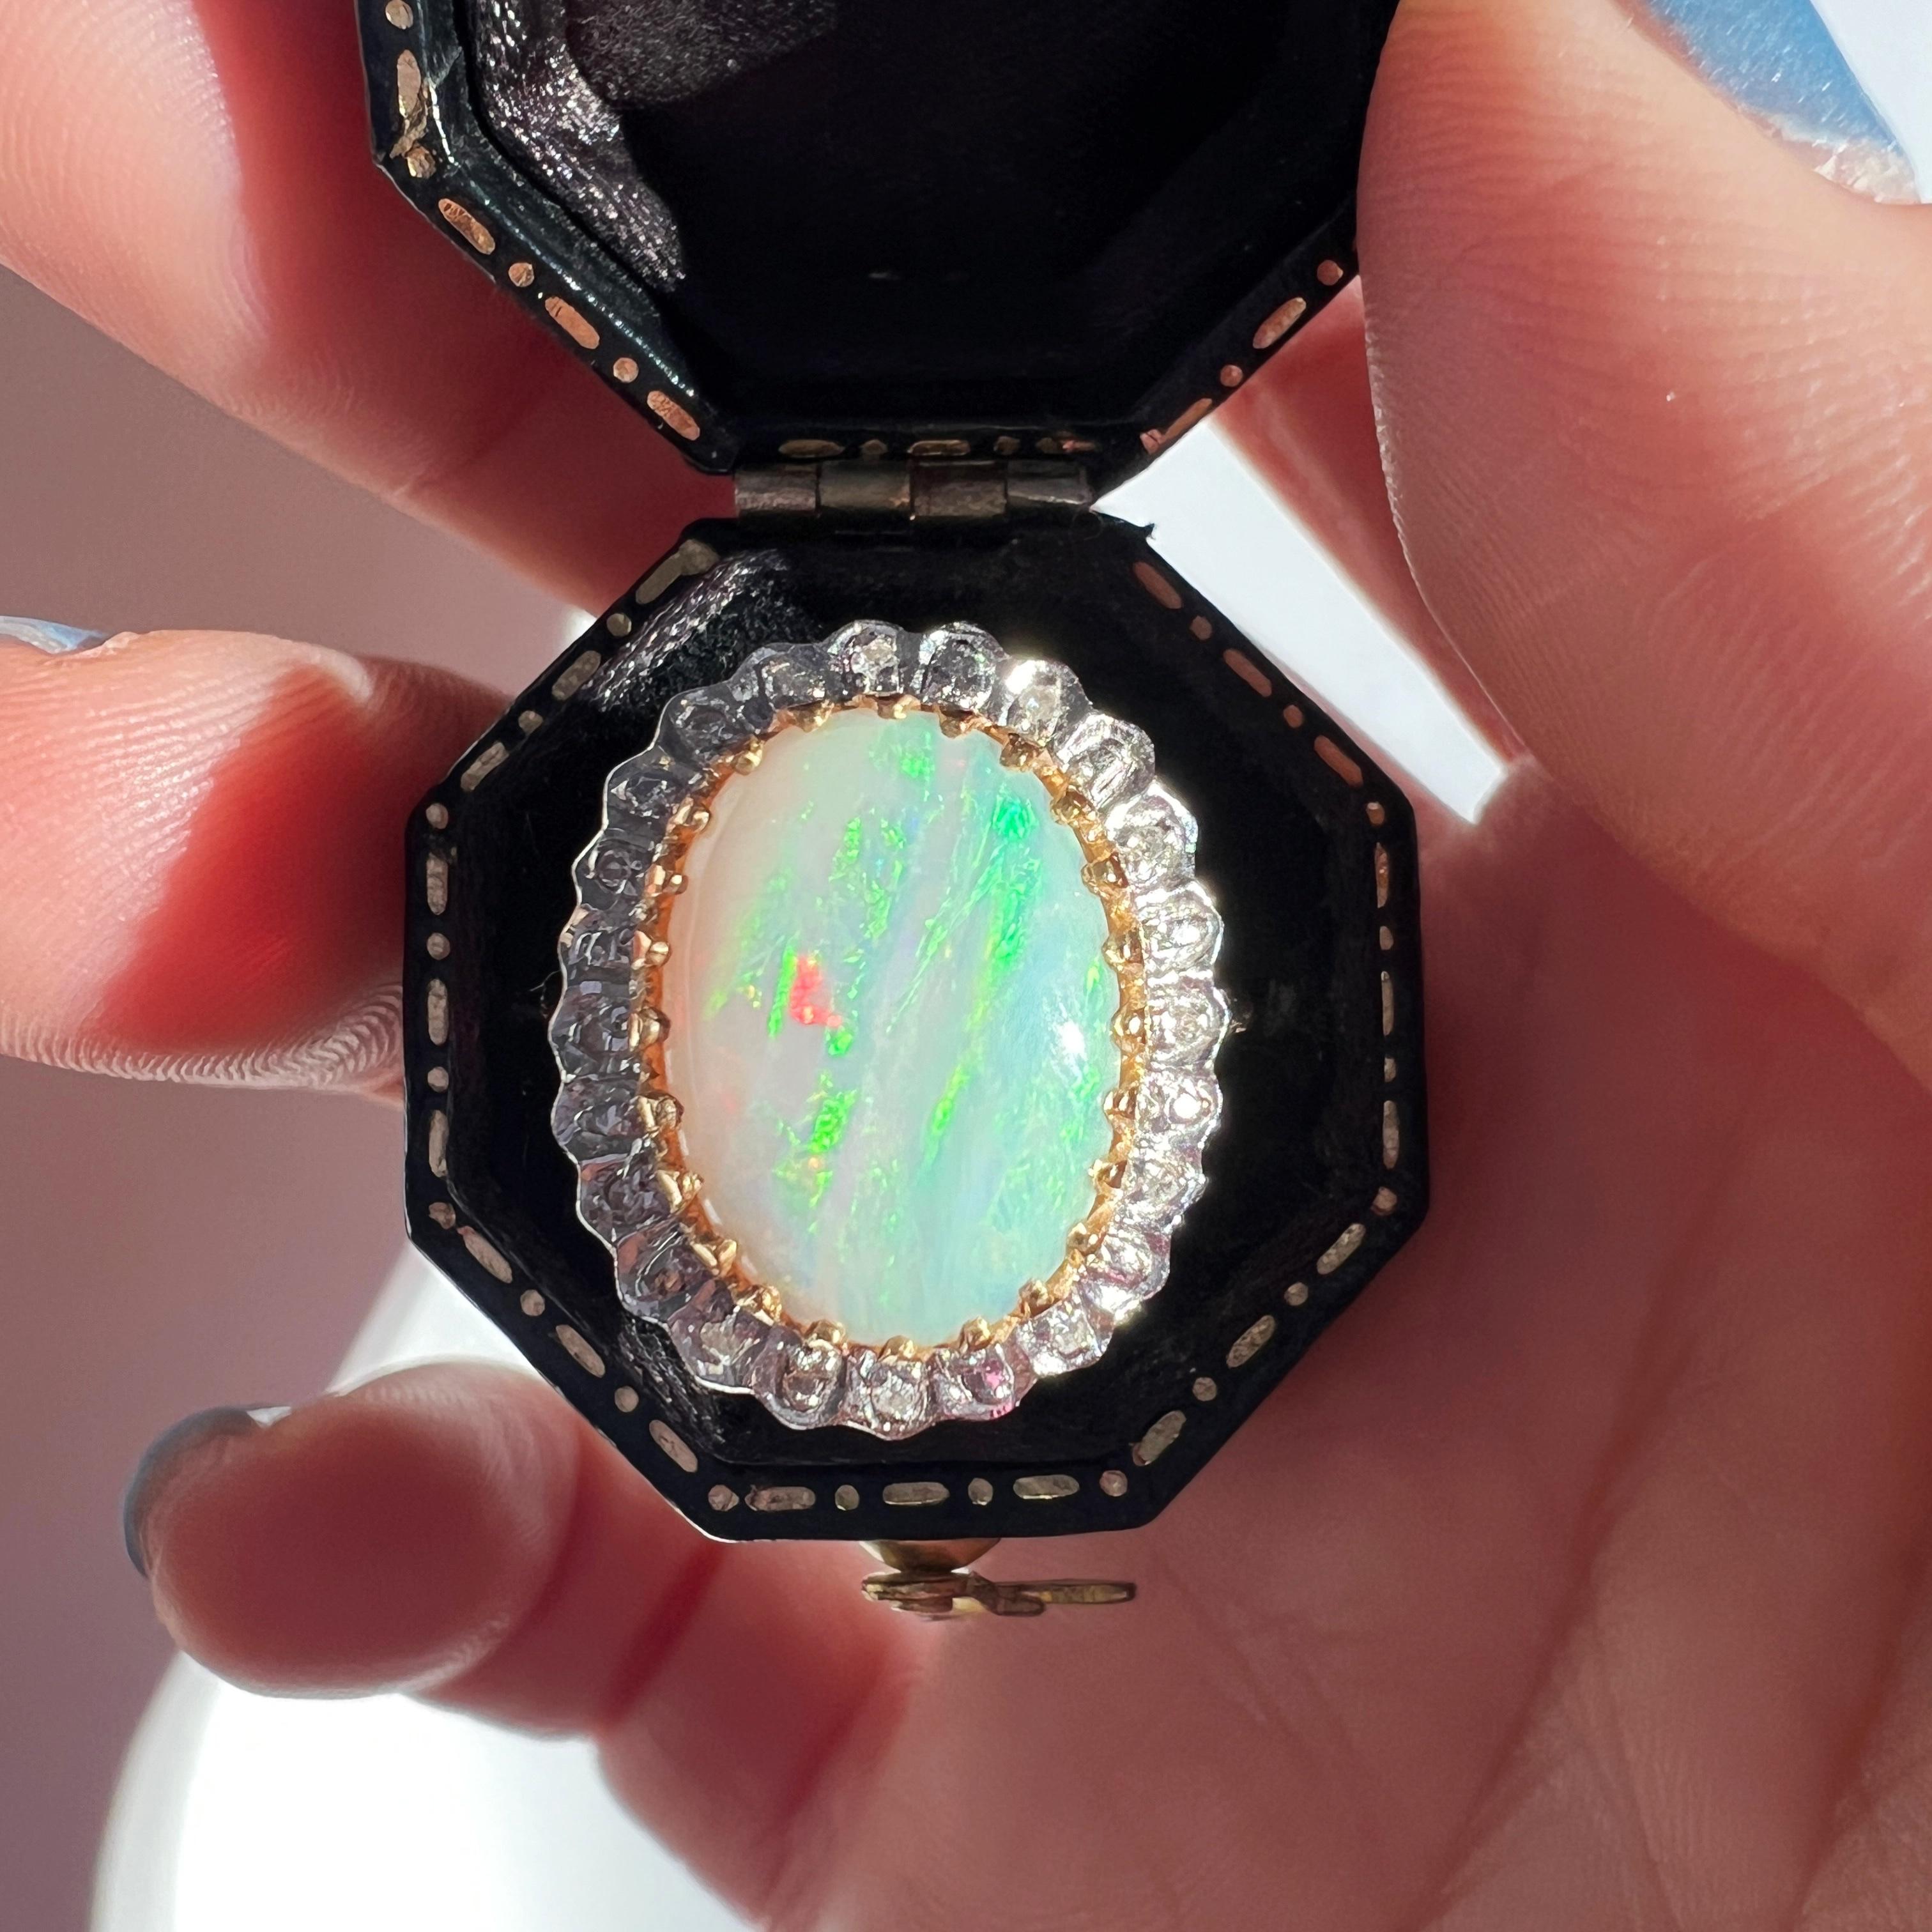 For sale a 18K gold opal diamond cocktail ring. This striking ring features a large, 14mm*11mm white opal, its mesmerizing play of fire exuding a magical allure that makes it truly exceptional.

The opal showcases a dynamic range of colors of